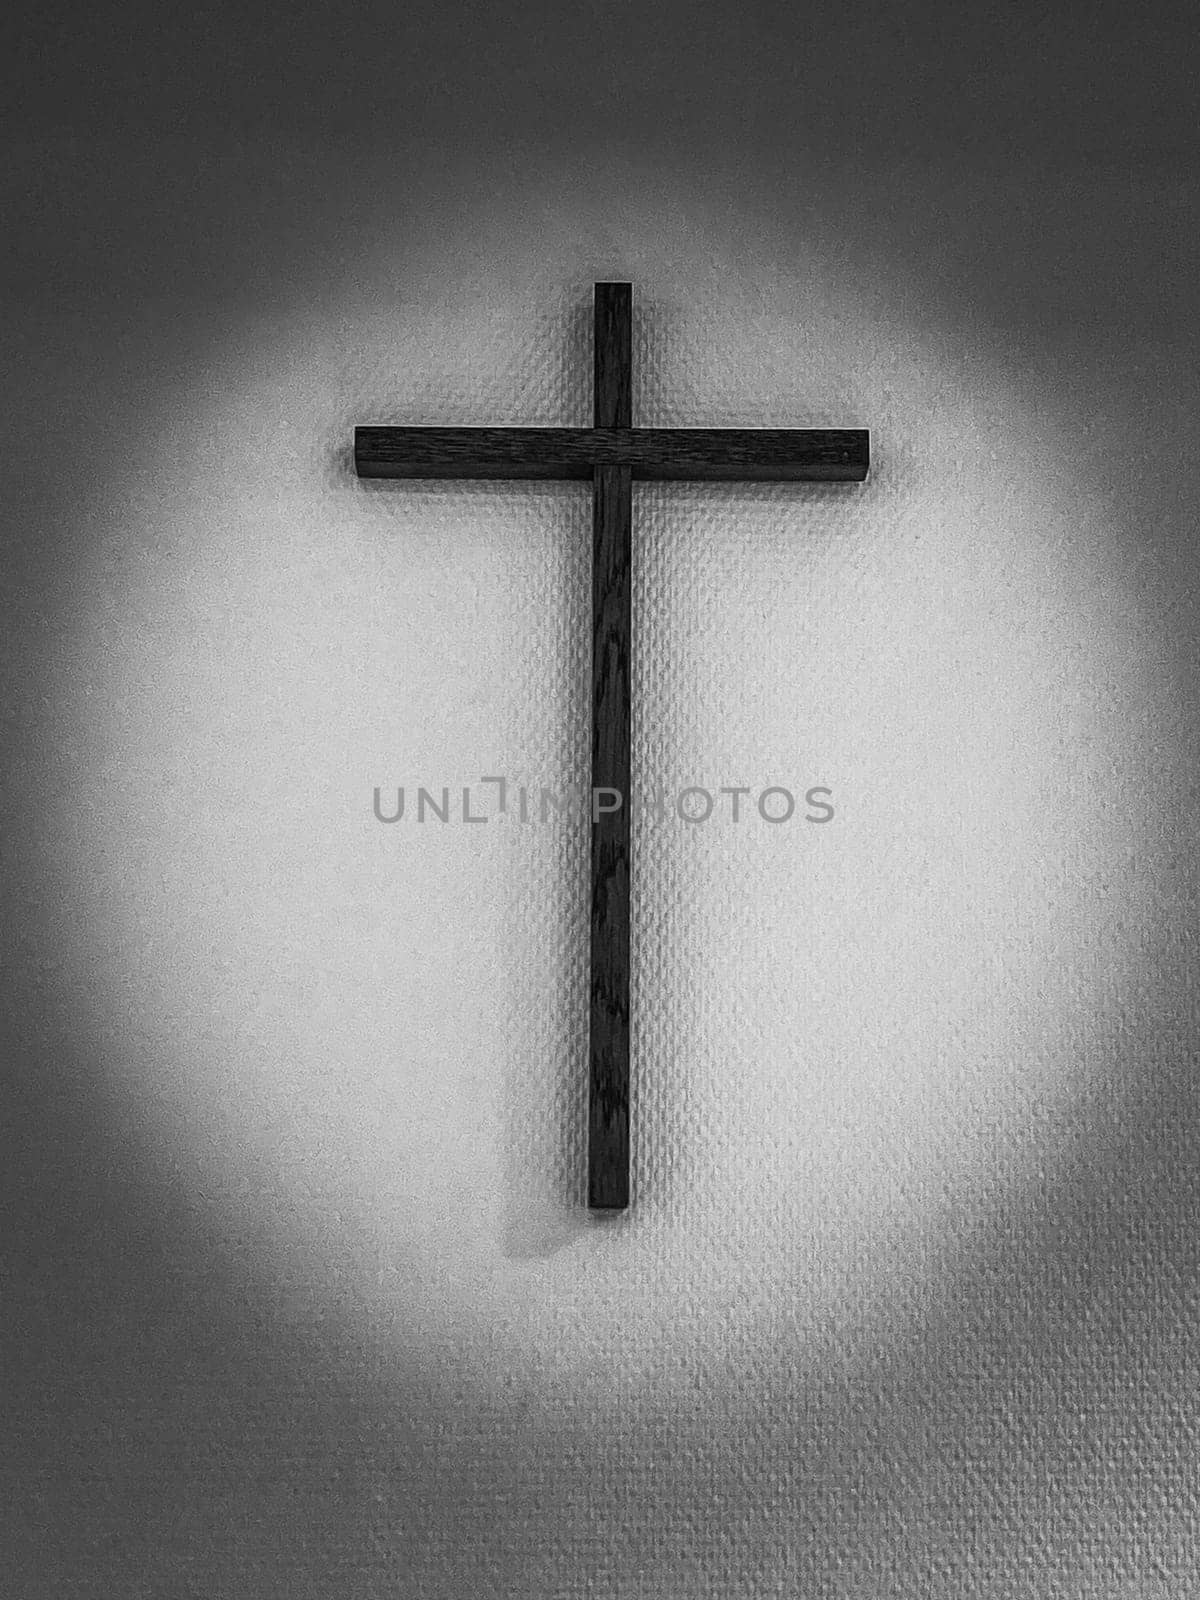 Concept or conceptual cross on background, texture with copy space for any text. metaphor 3d illustration for god, christ, christianity, religion, faith, saint, spiritual, jesus, faith, resurrection. christian wooden cross in a school classroom. A typical picture in German schools at the beginning of the 21st century, Europe by Costin